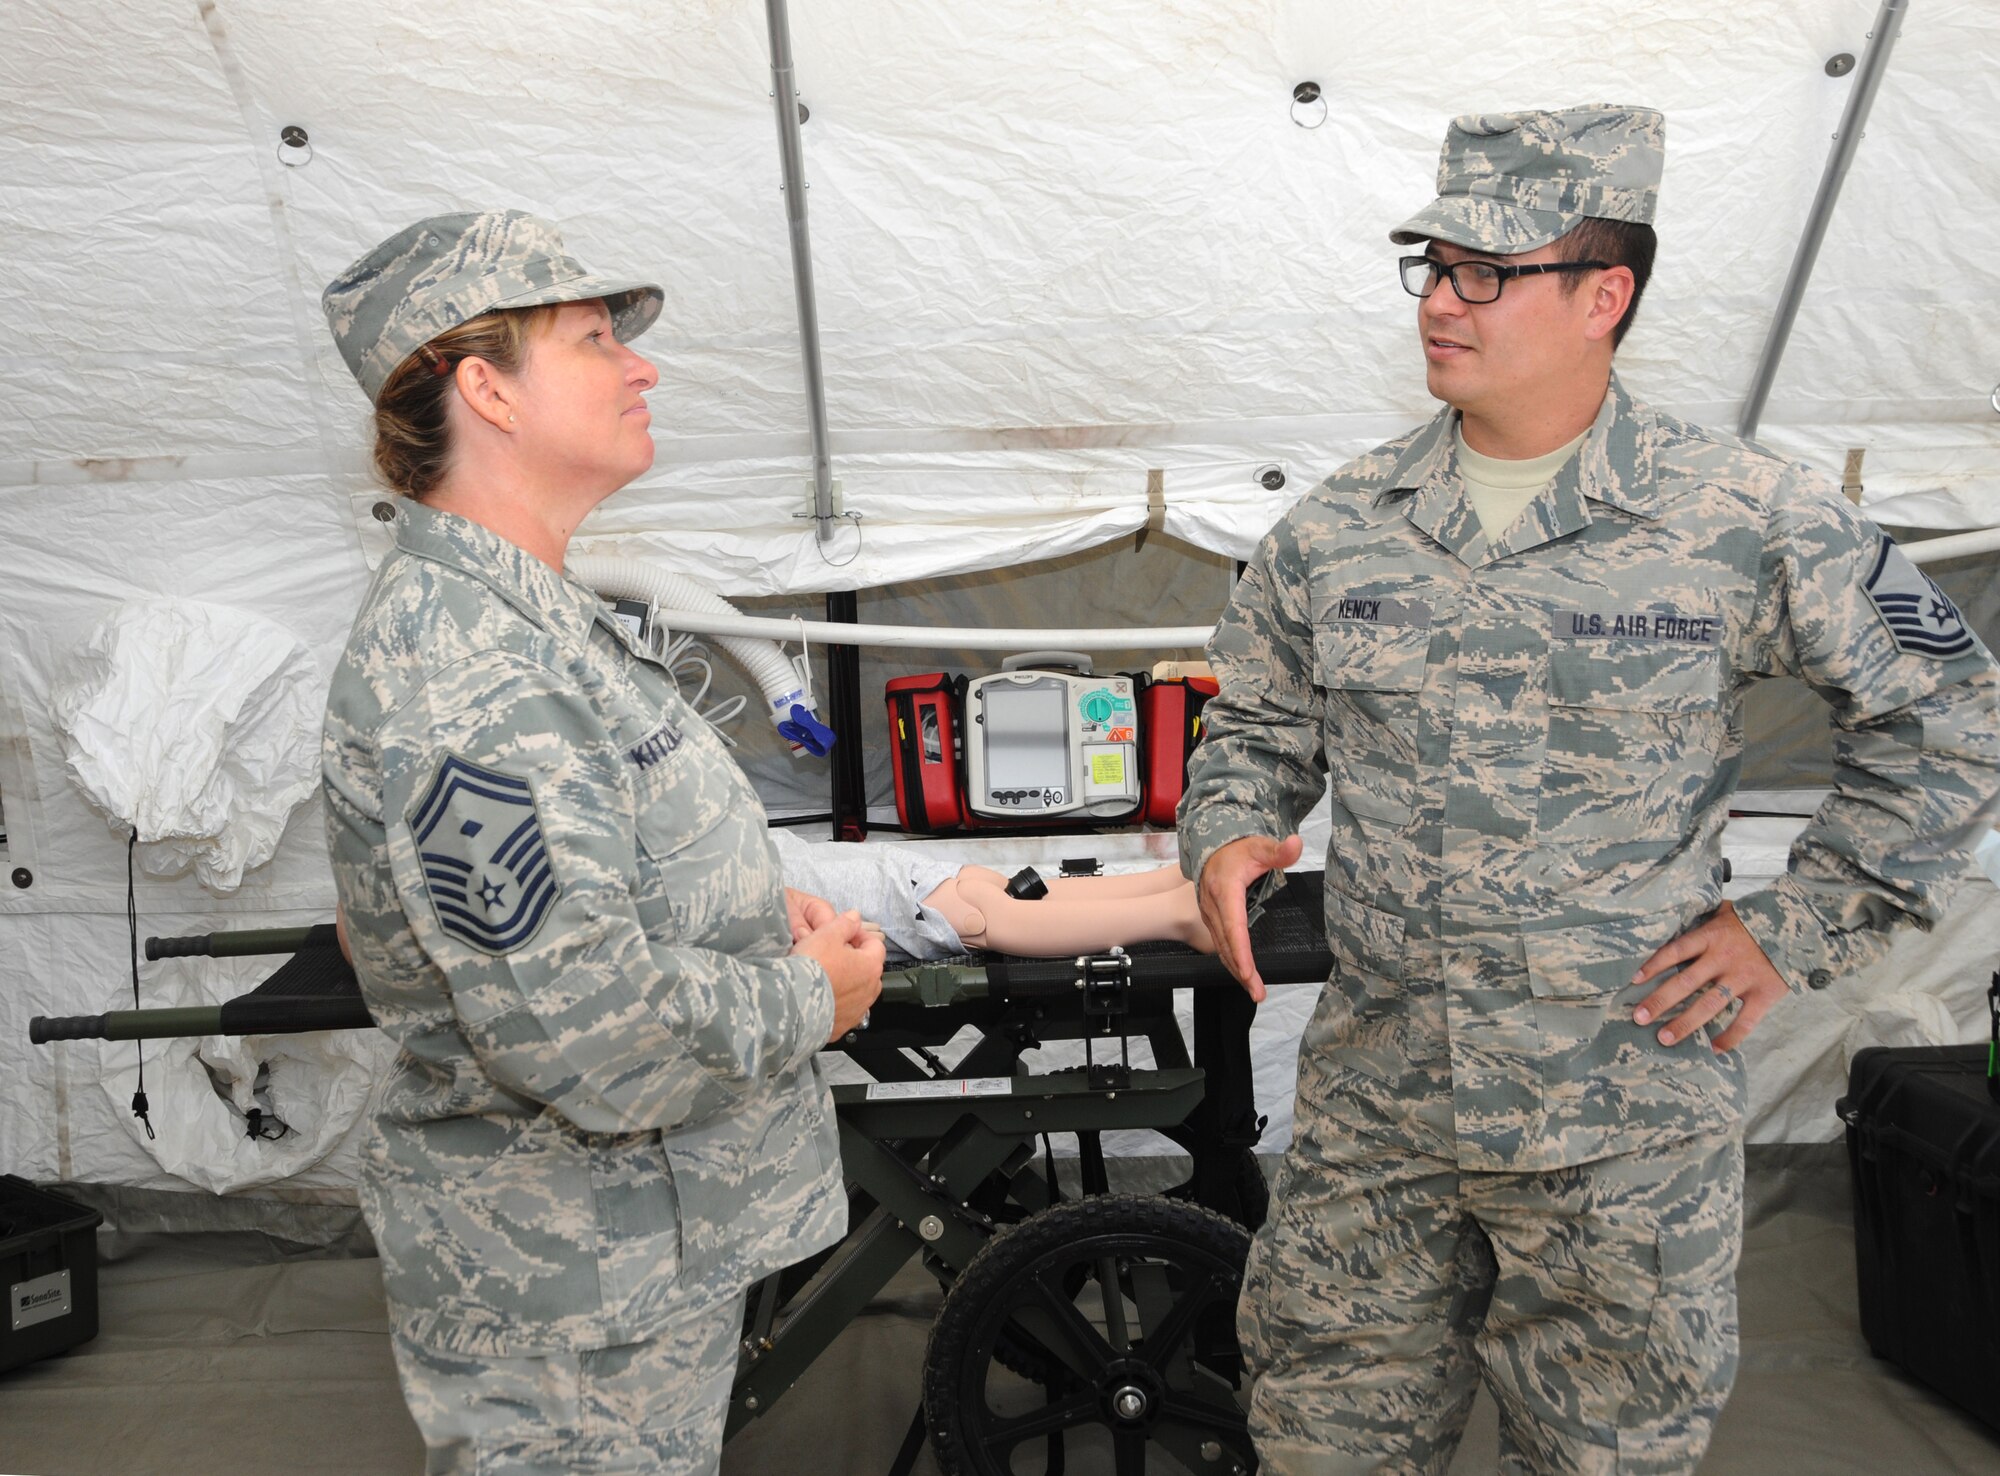 Senior Master Sgt. Lorene Kitzmiller, the First Sgt. for 1st Air Force, left, discusses some of the procedures and training that Airmen of the CBRNE Enhanced Response Force Packages (CERFP) take on as first responders, during a tour of the Portland Air National Guard Base, Ore., June 10, 2014. (Air National Guard photo by Tech. Sgt. John Hughel, 142nd Fighter Wing Public Affairs/Released)